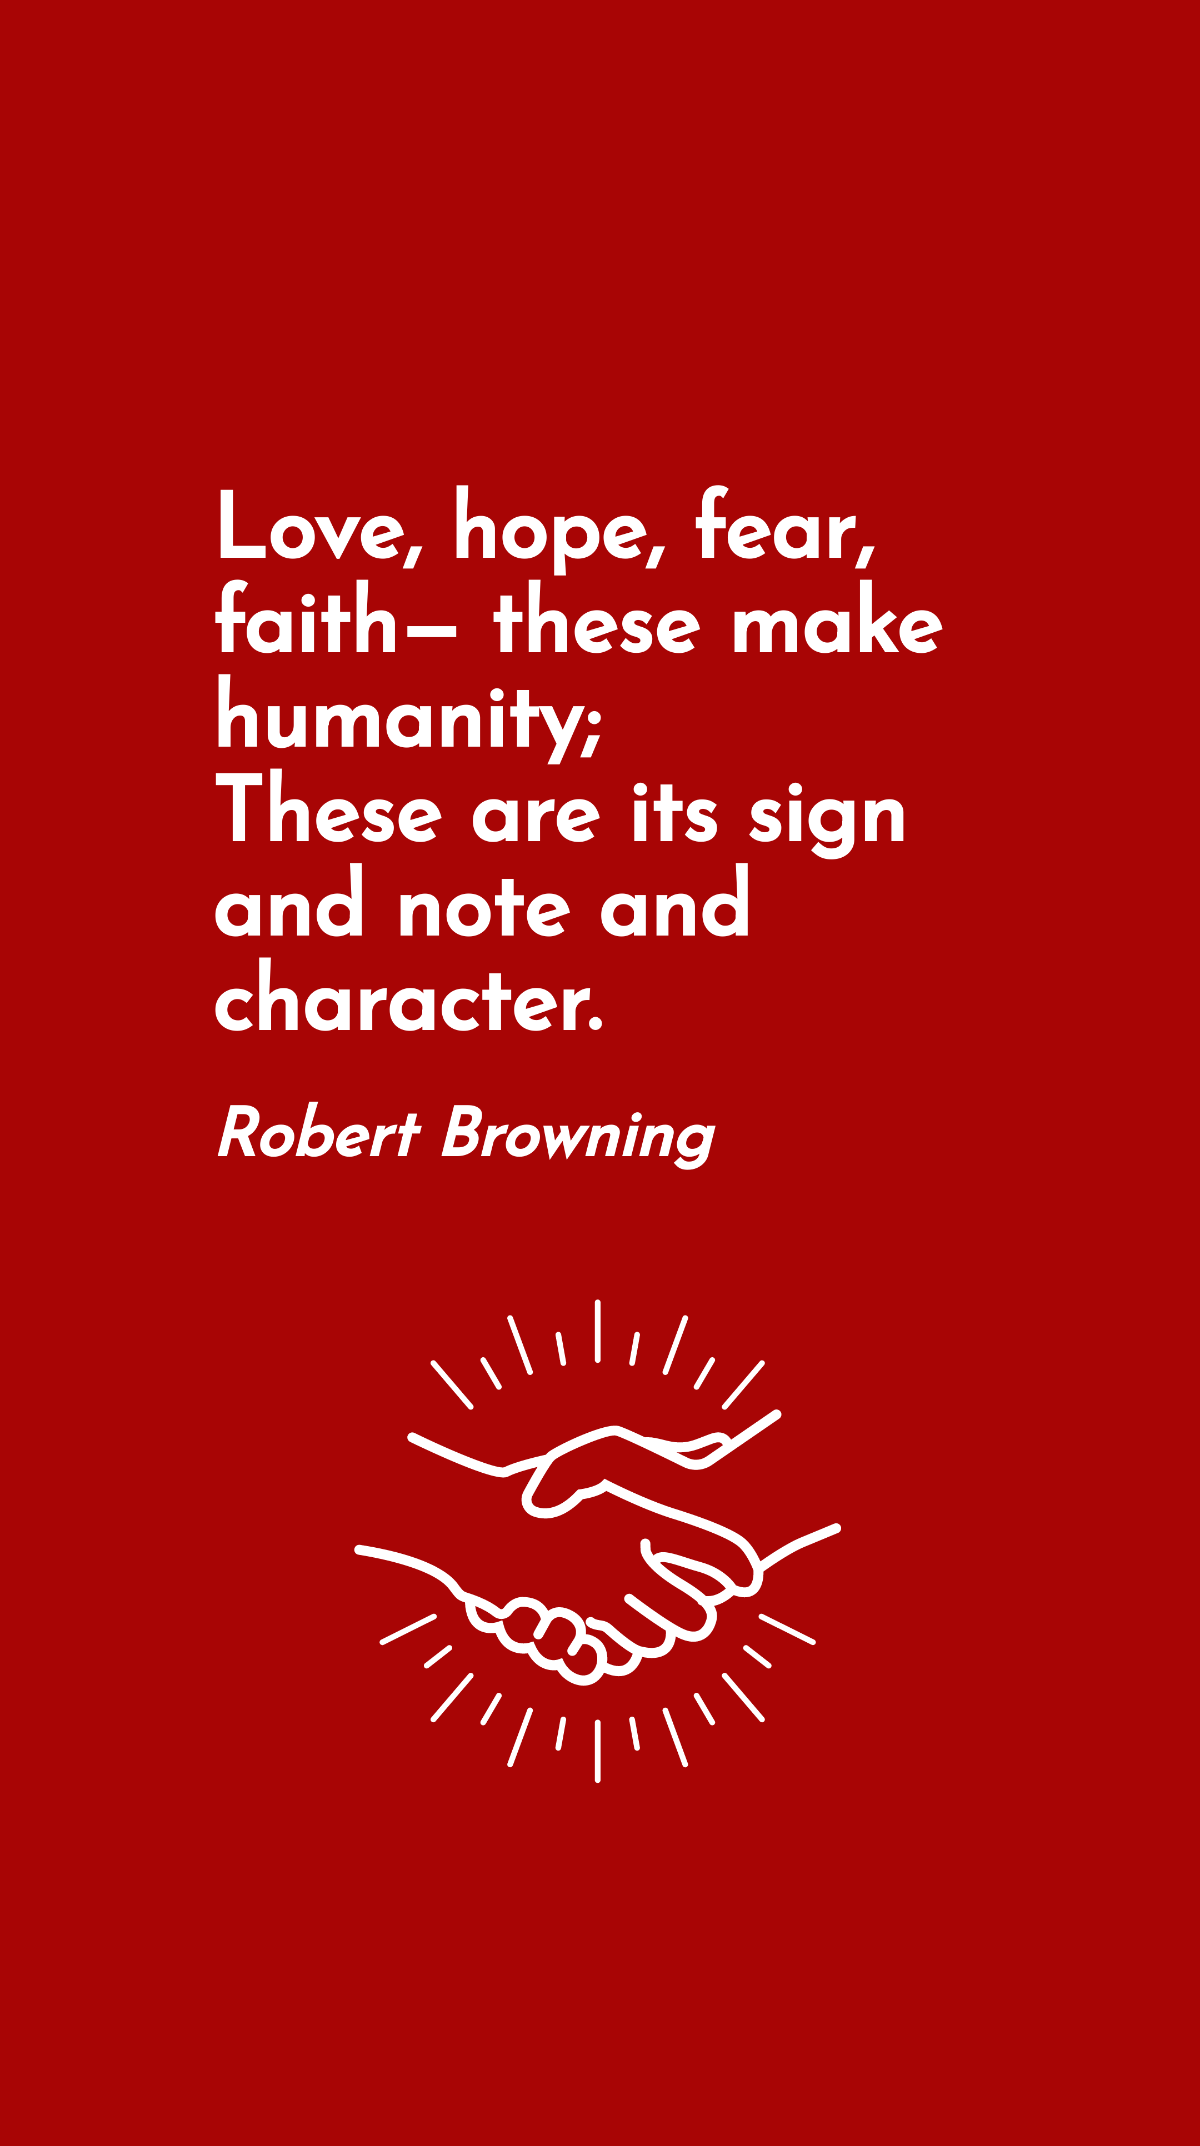 Robert Browning - Love, hope, fear, faith - these make humanity; These are its sign and note and character.